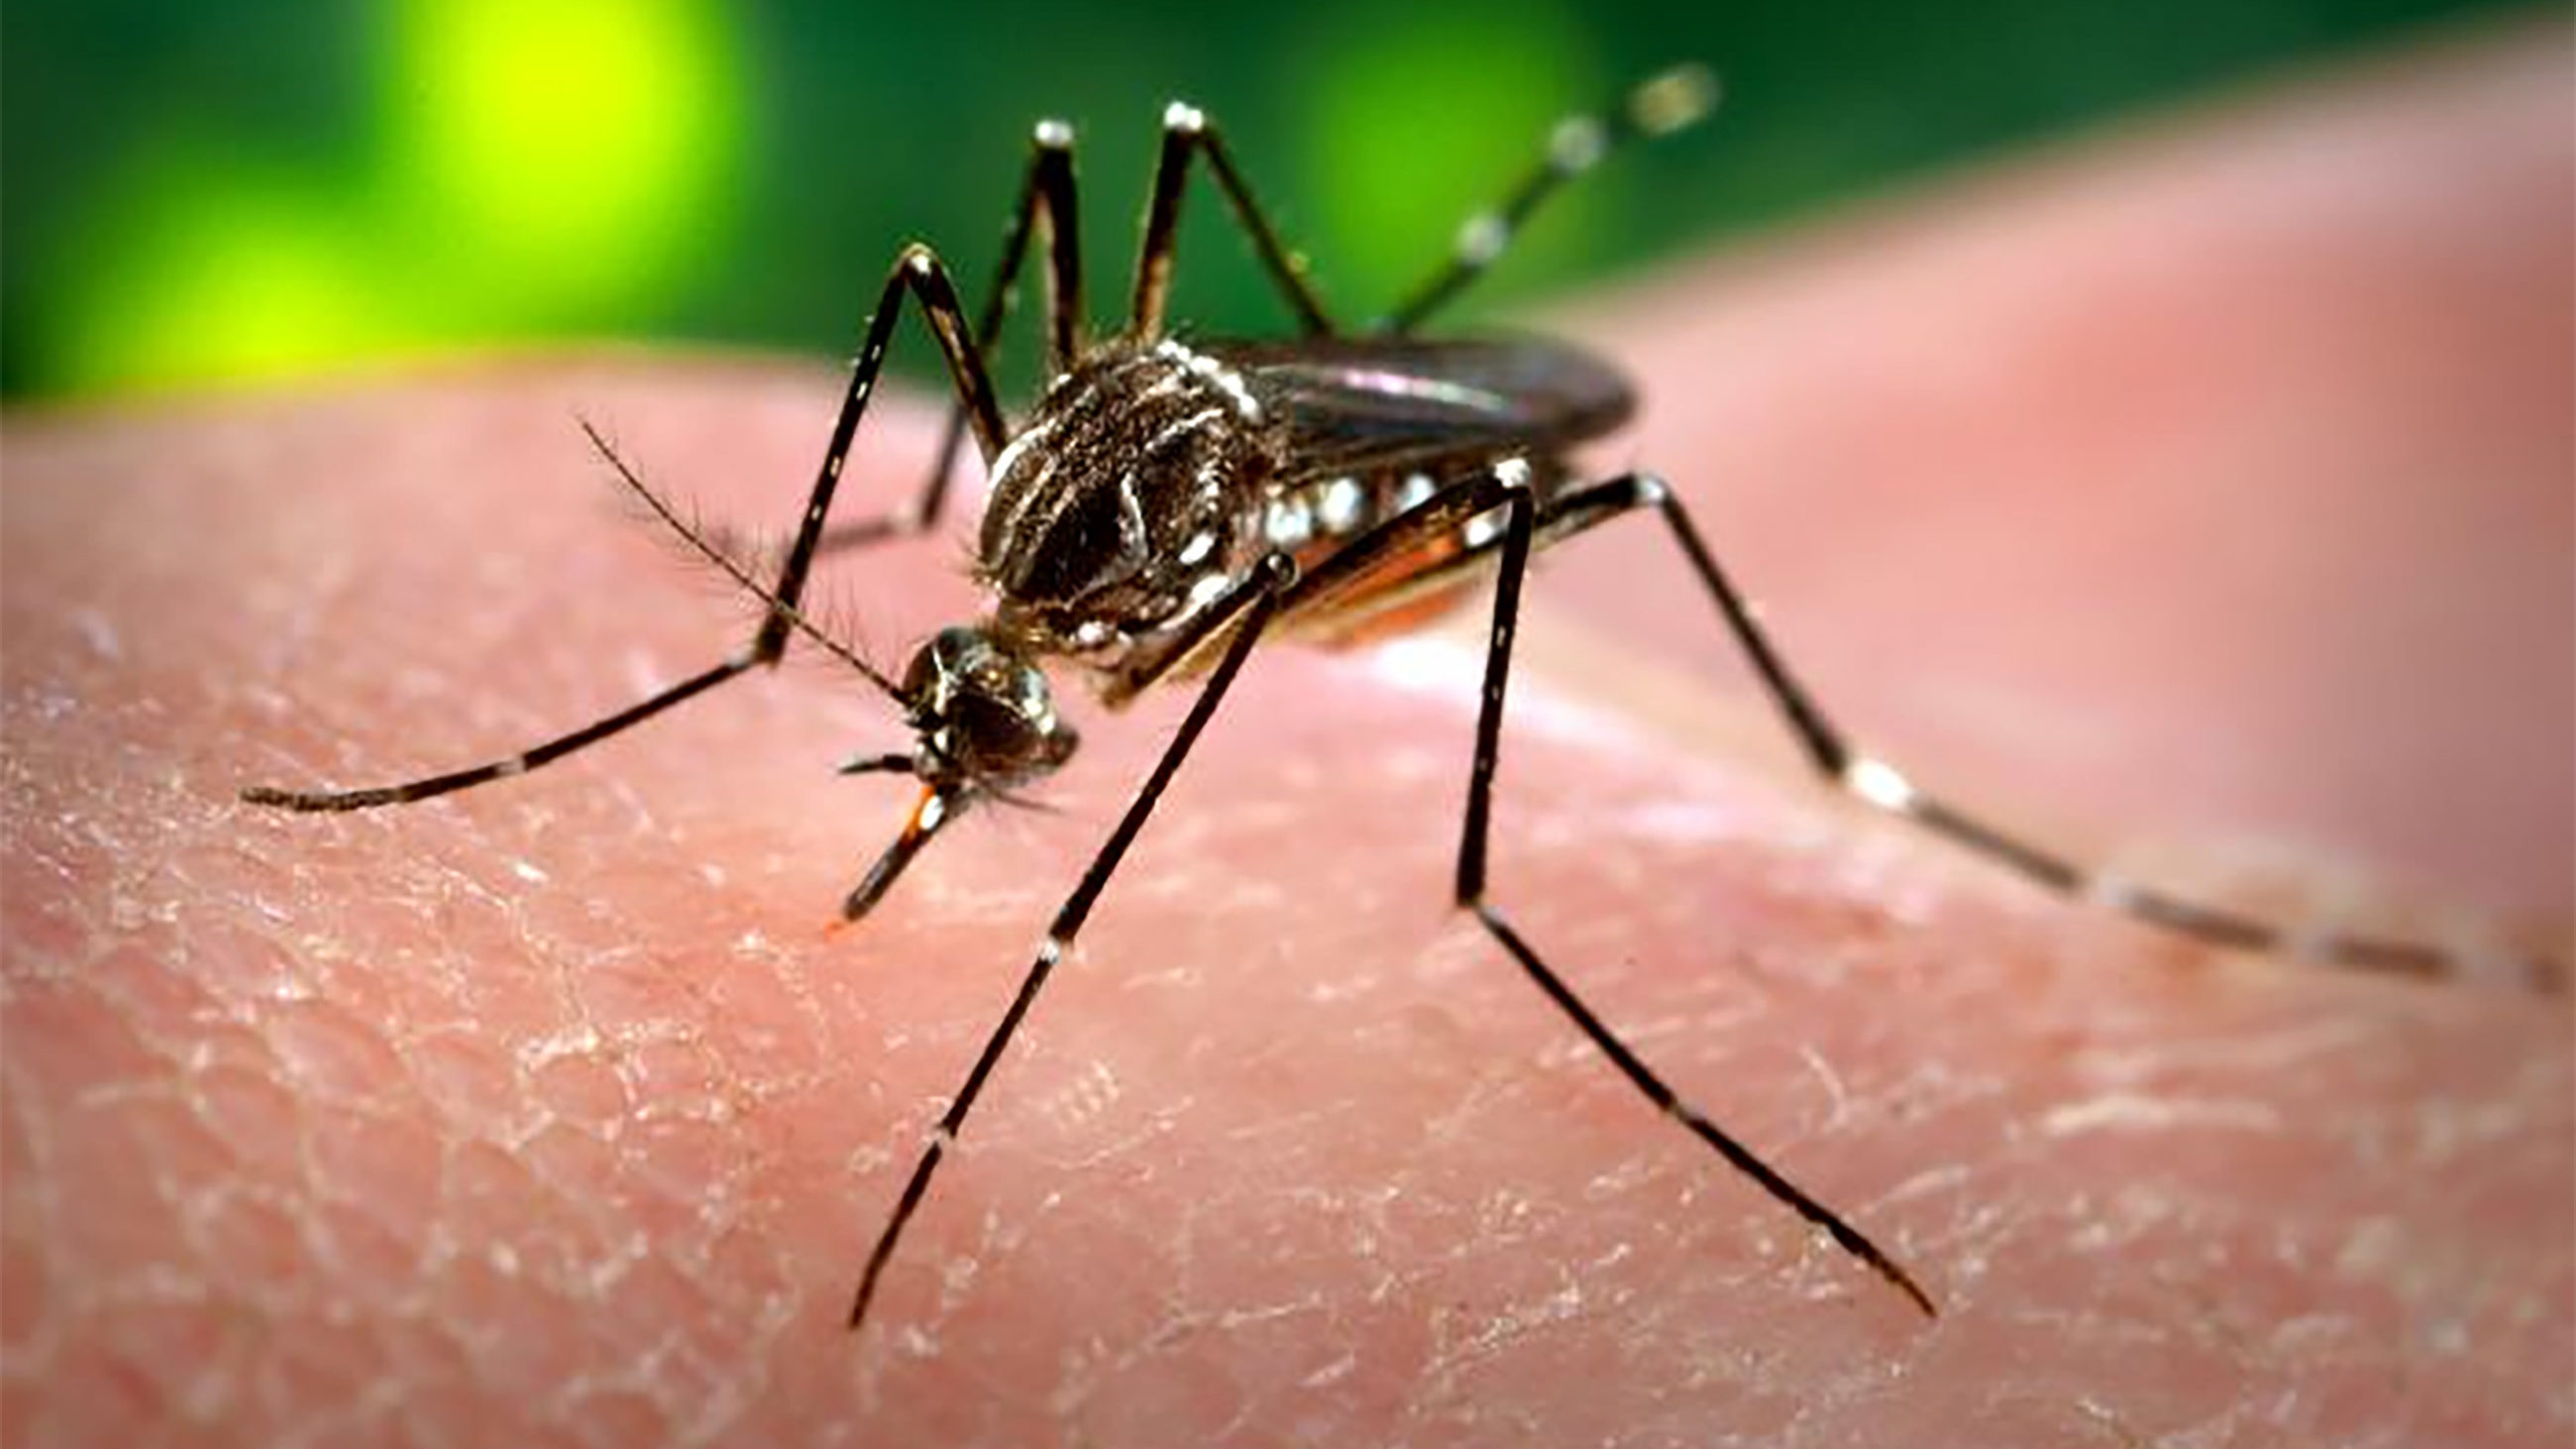 Florida officials are hoping to experiment with genetically altered versions of mosquitoes that carry diseases like the Zika virus. Not everyone likes the idea.